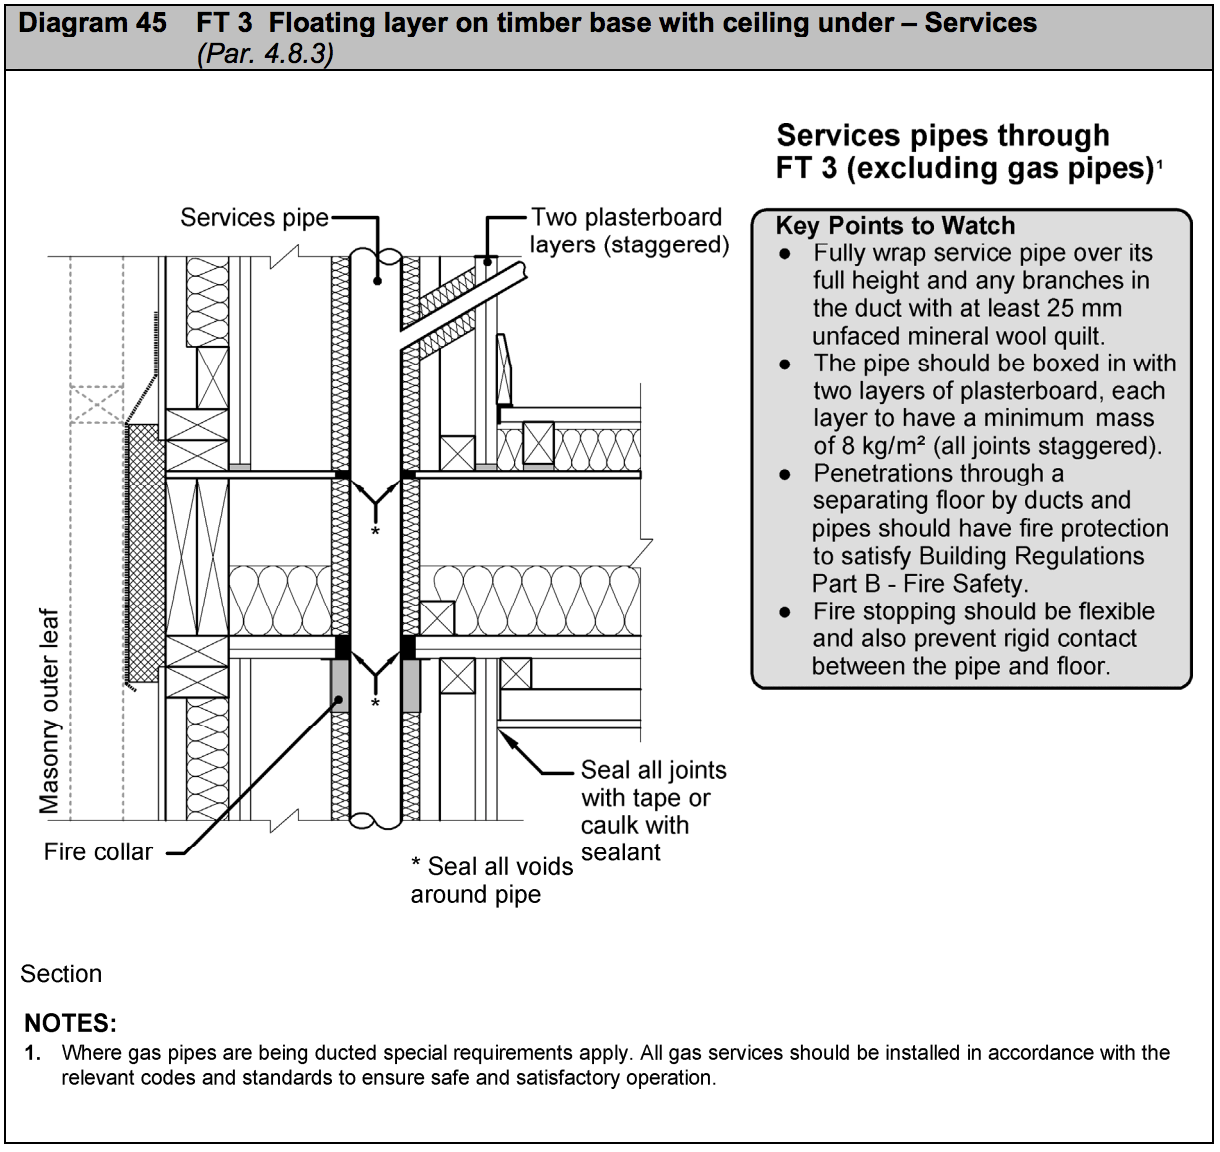 Diagram HE45 - FT 3 Floating layer on timber base with ceiling under - services - Extract from TGD E